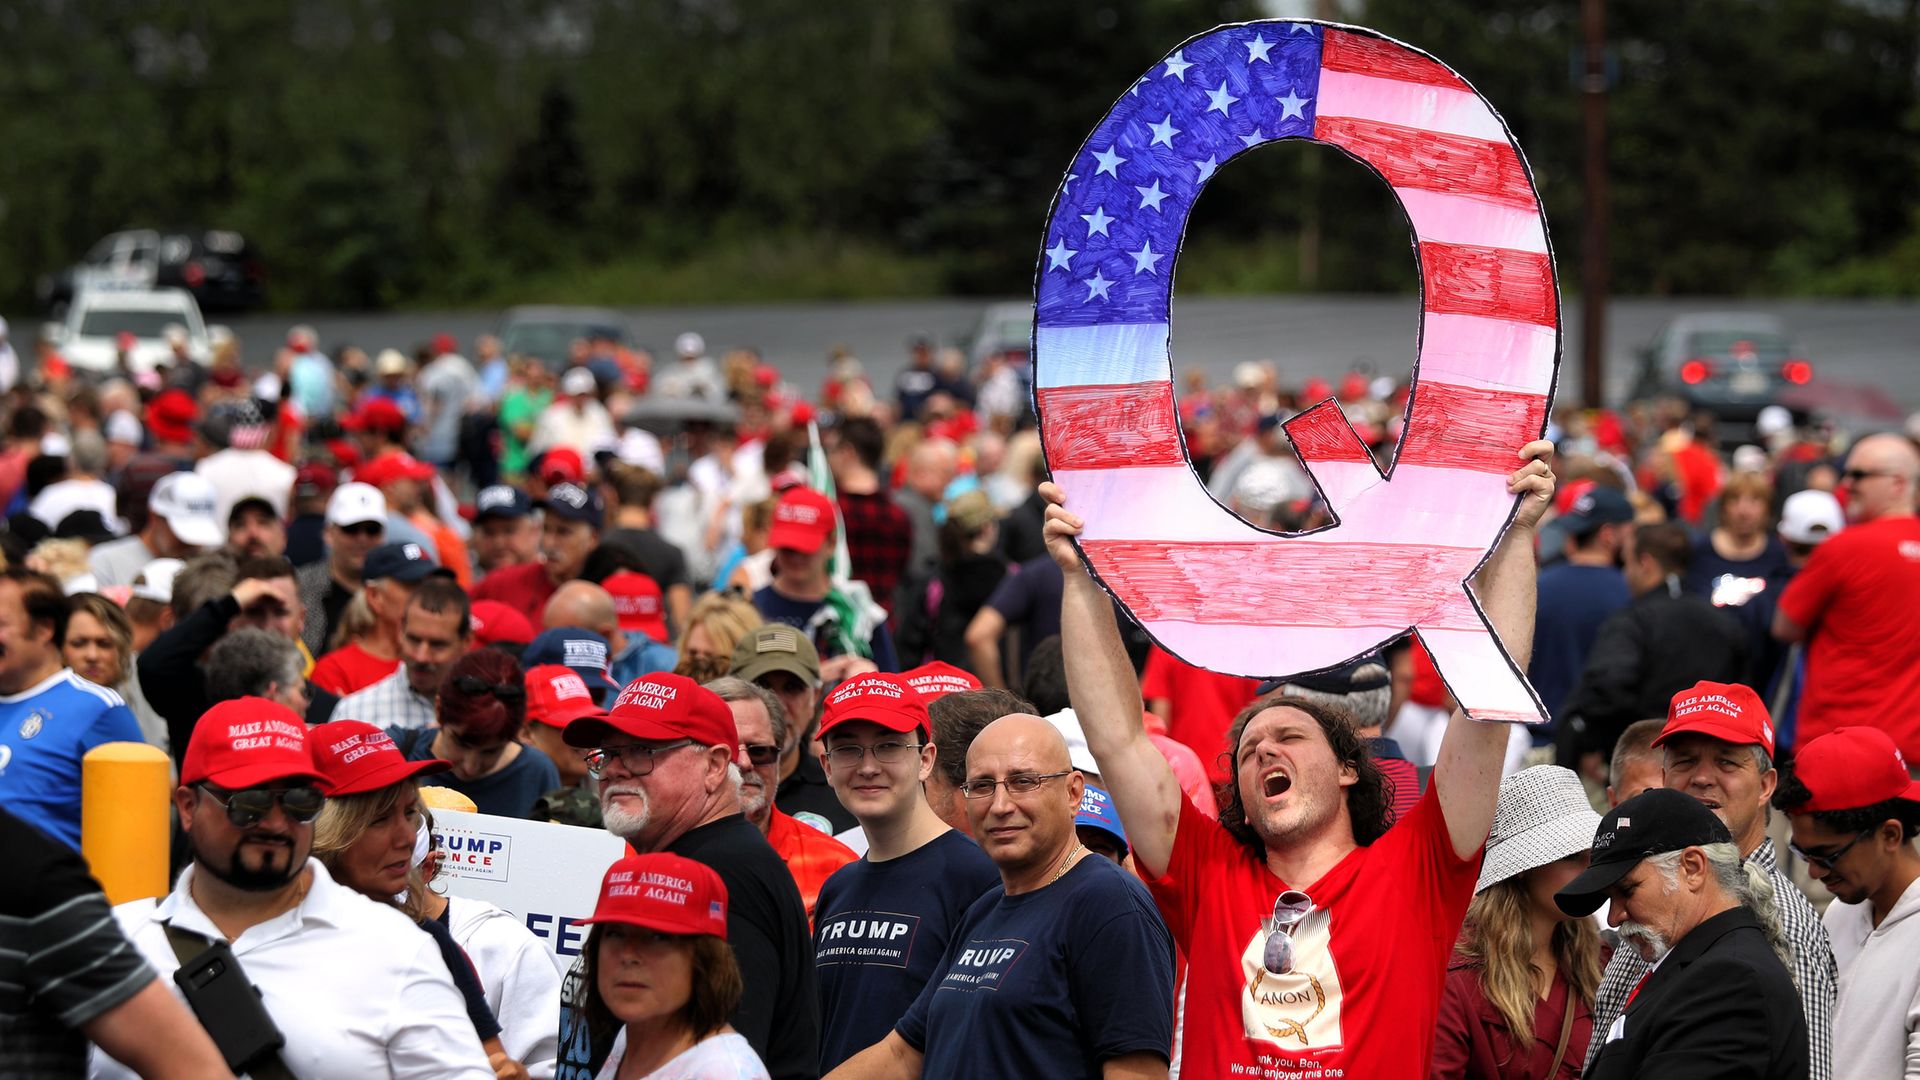 A 'Q' sign, representing QAnon, is held up at a Trump rally in Pennsylvania. The conspiracy theory is the most extreme example of the Age of Belief - Credit: Getty Images